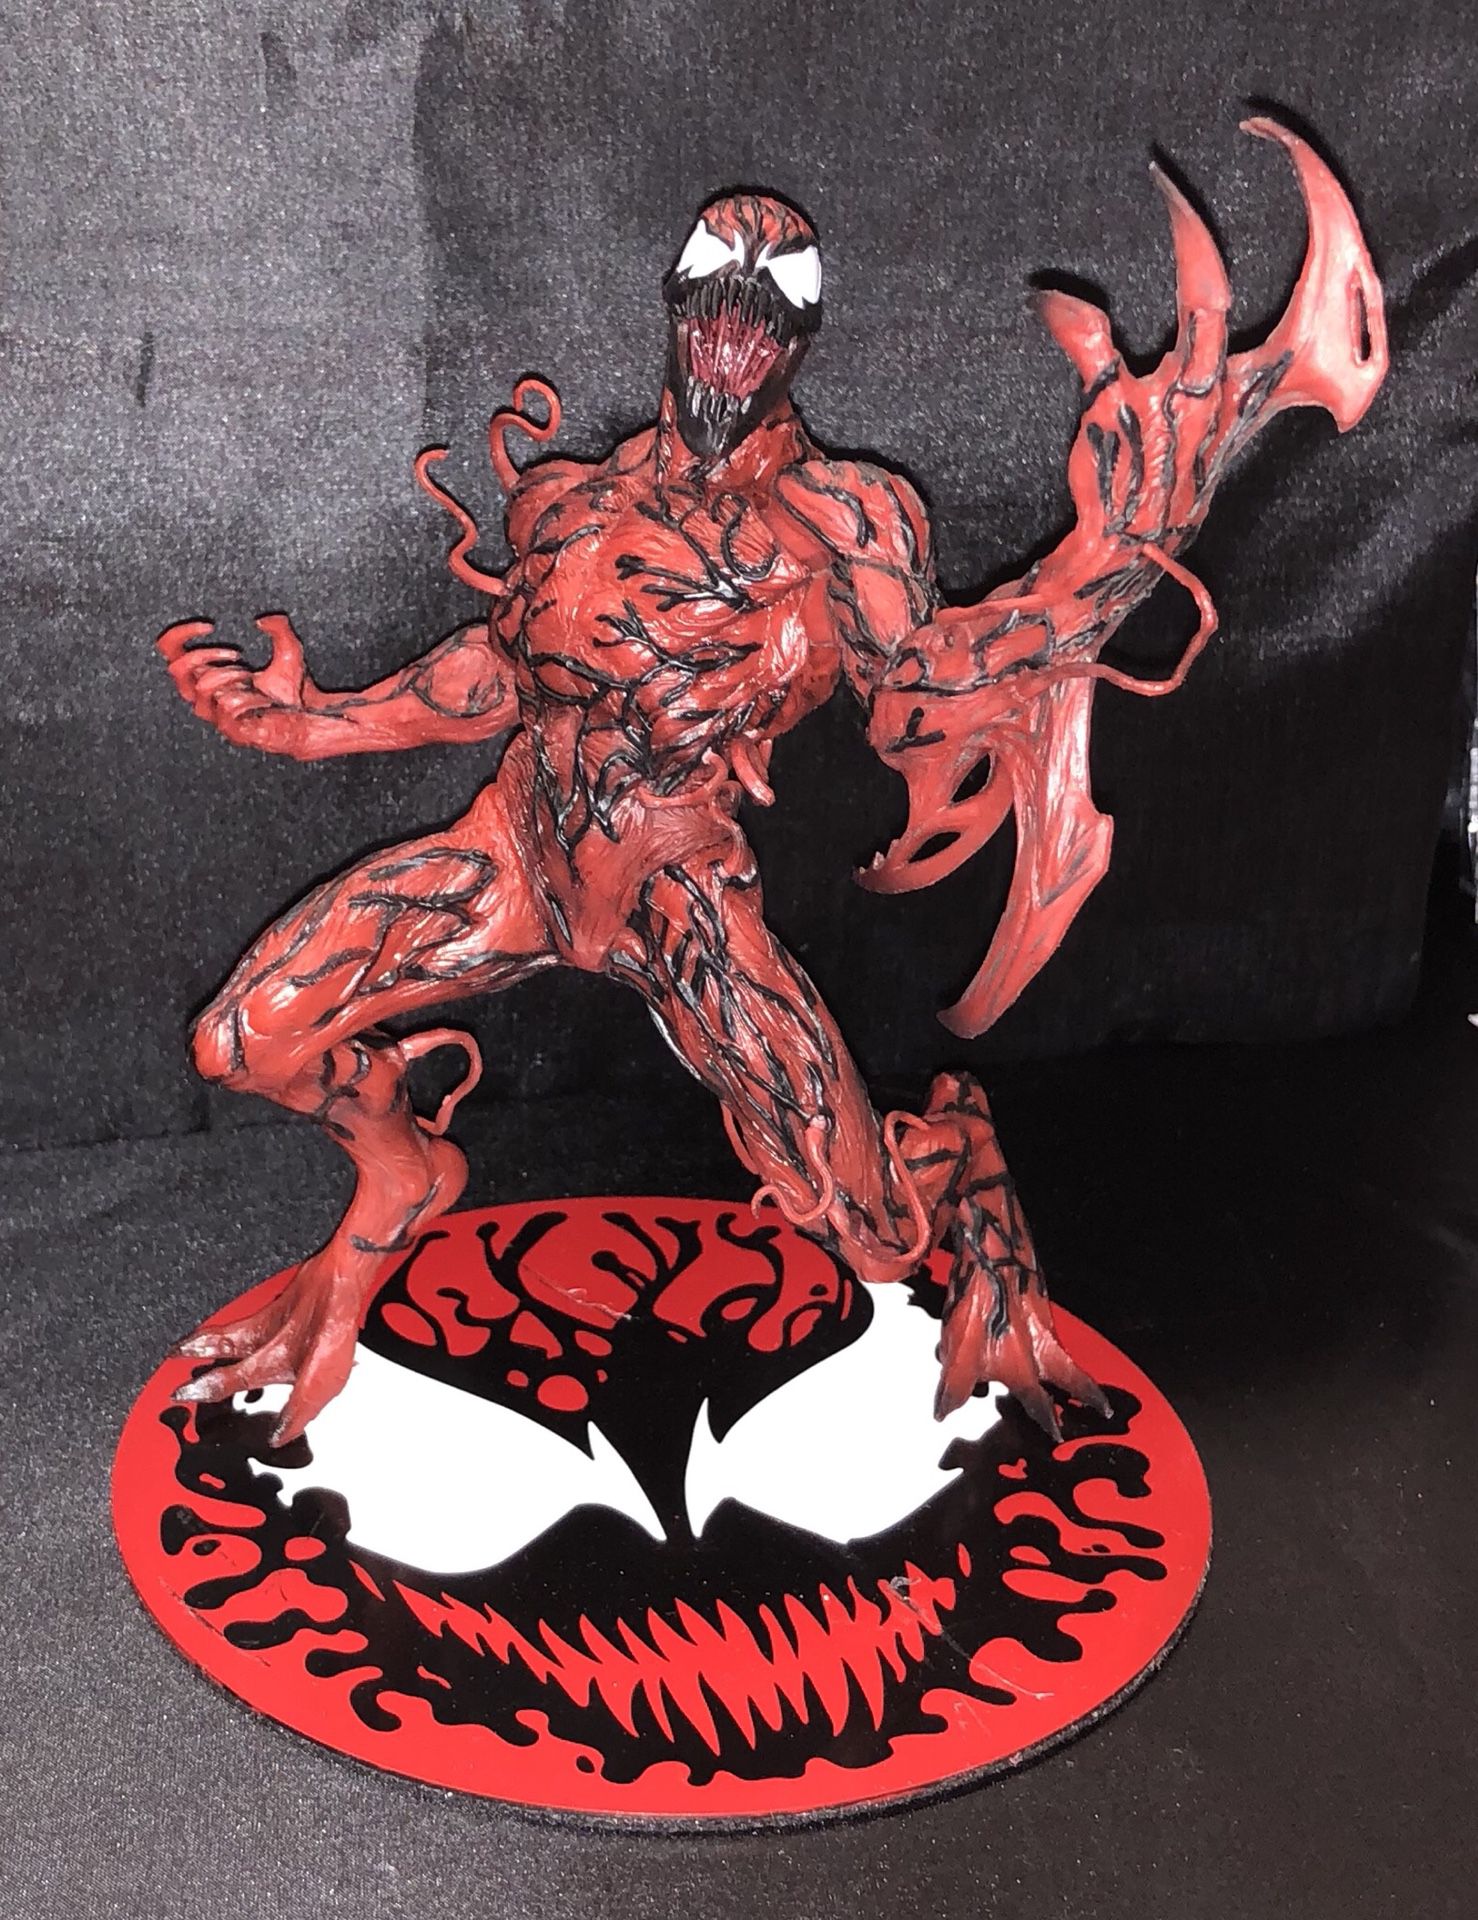 Carnage artfx statue magnetic base. Spiderman collectible